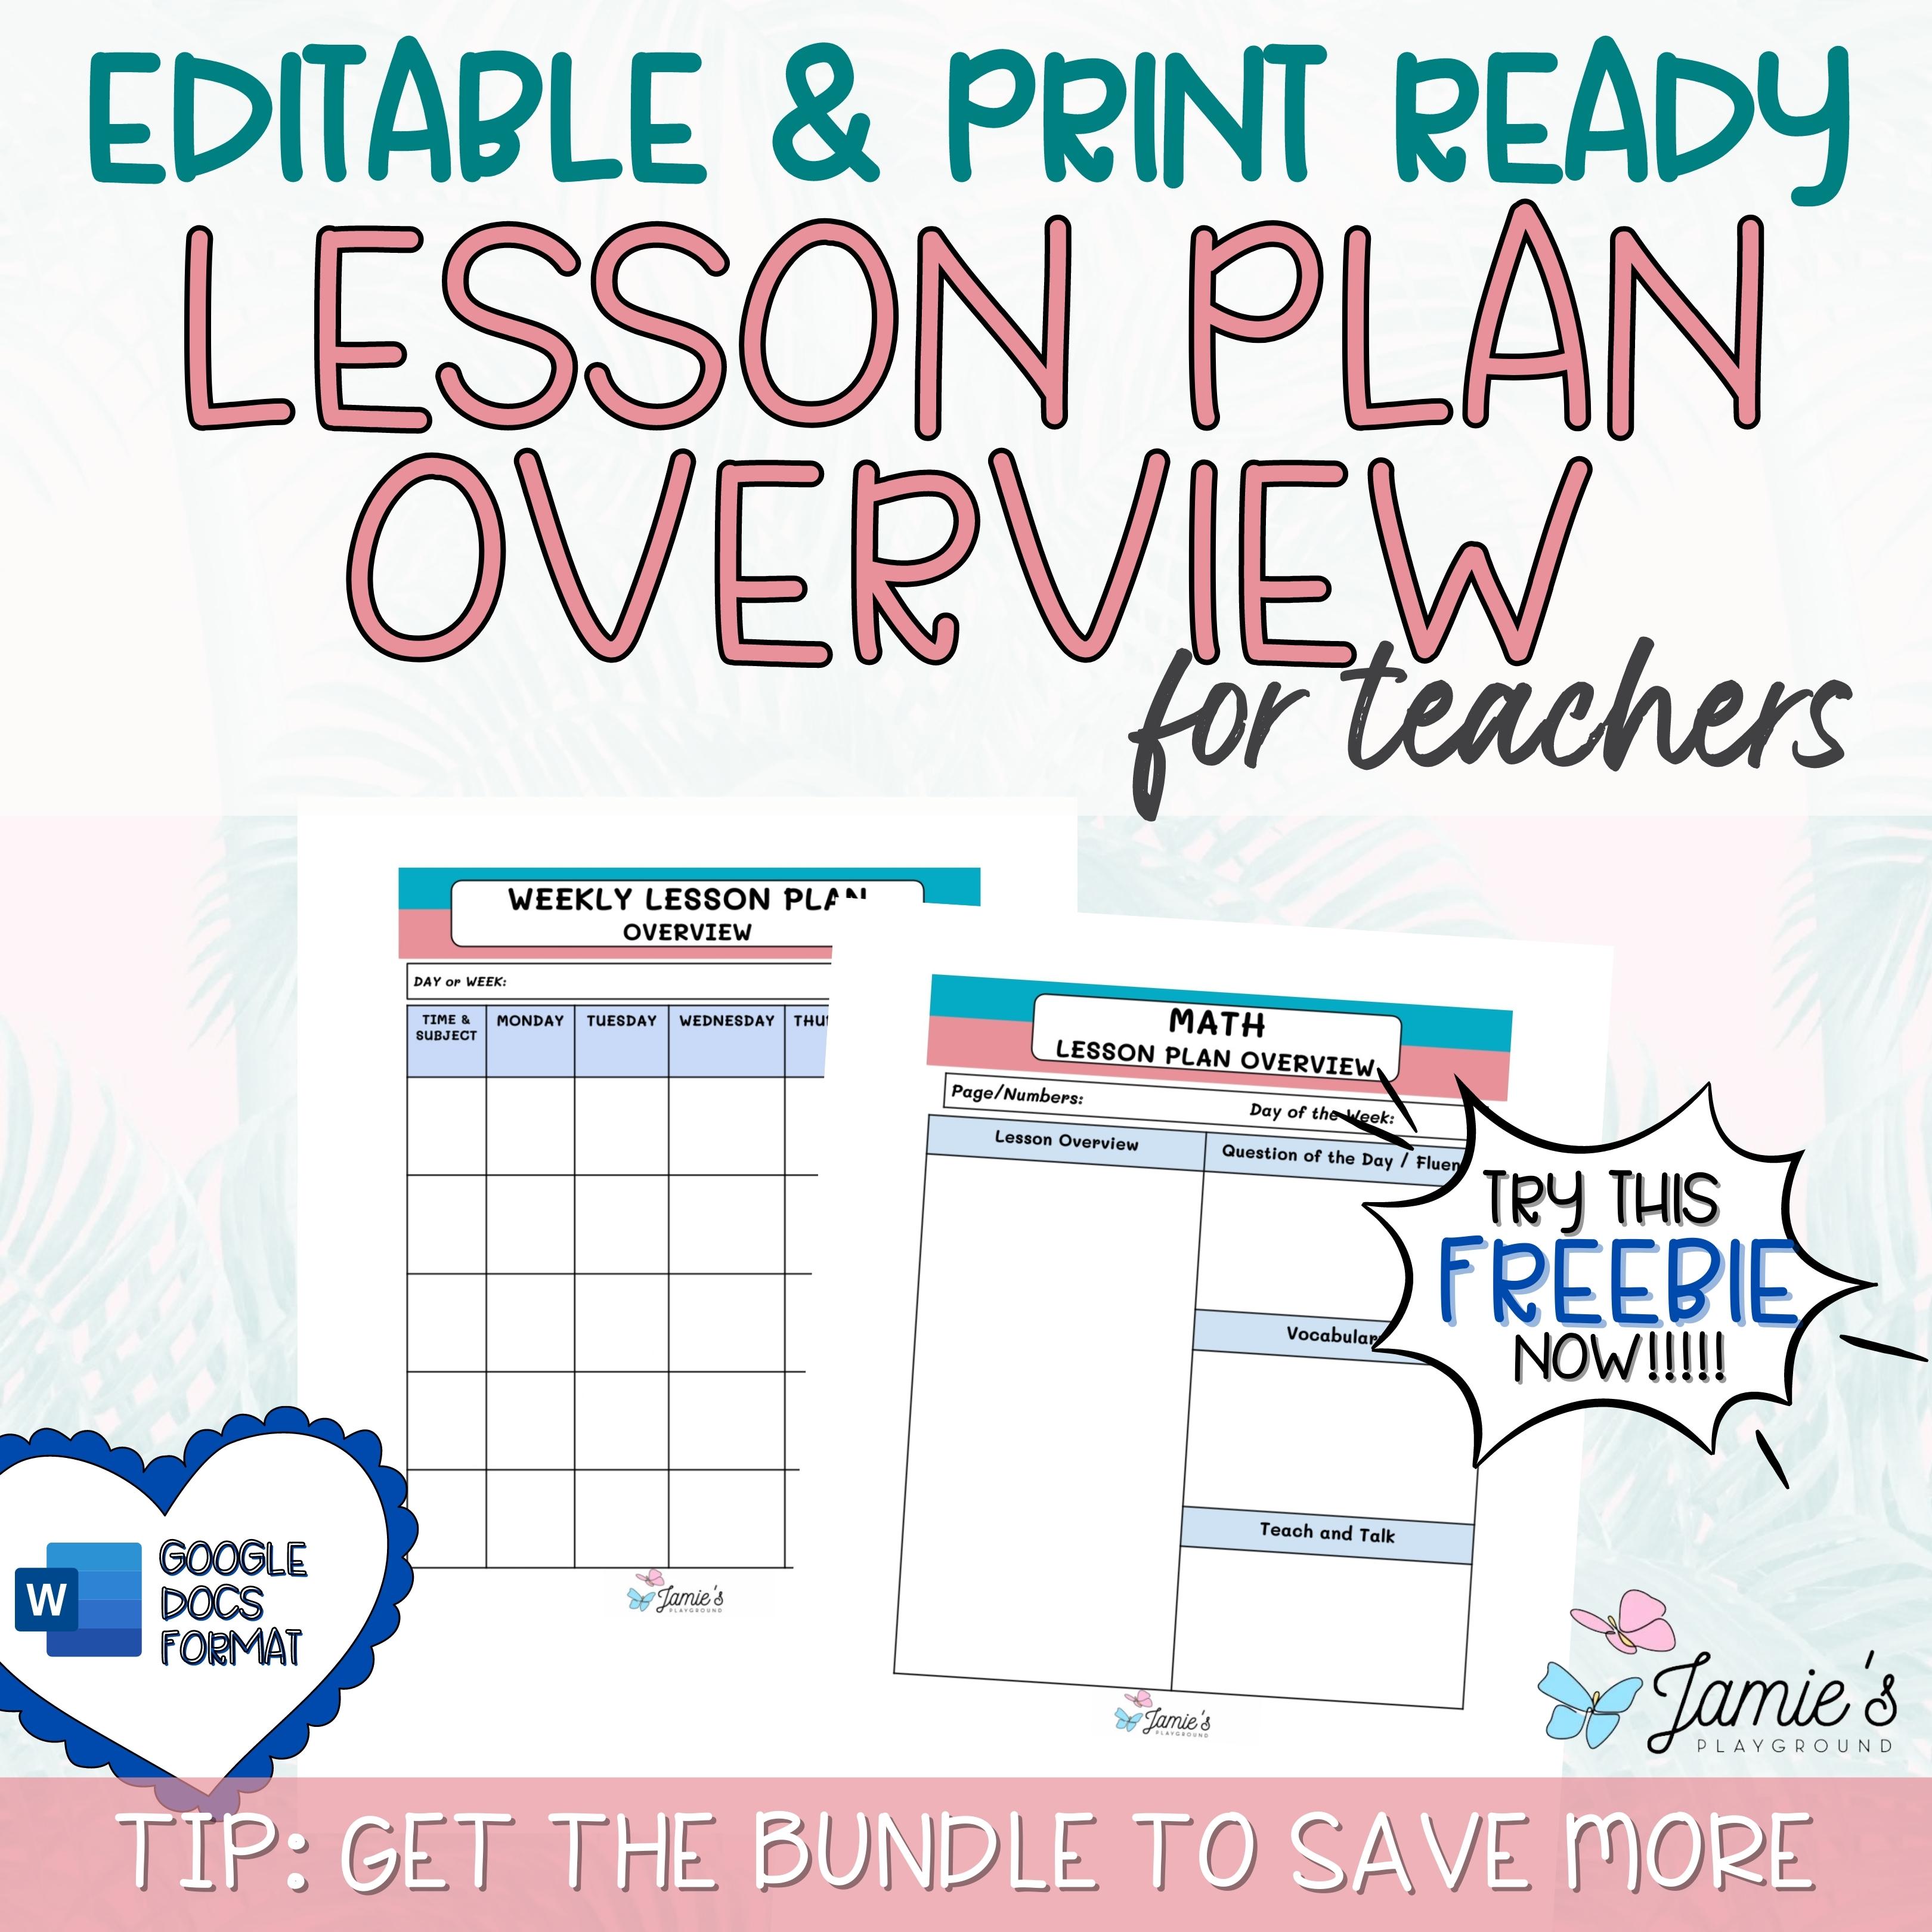 free-editable-weekly-lesson-plan-template-in-word-pink-teal-theme